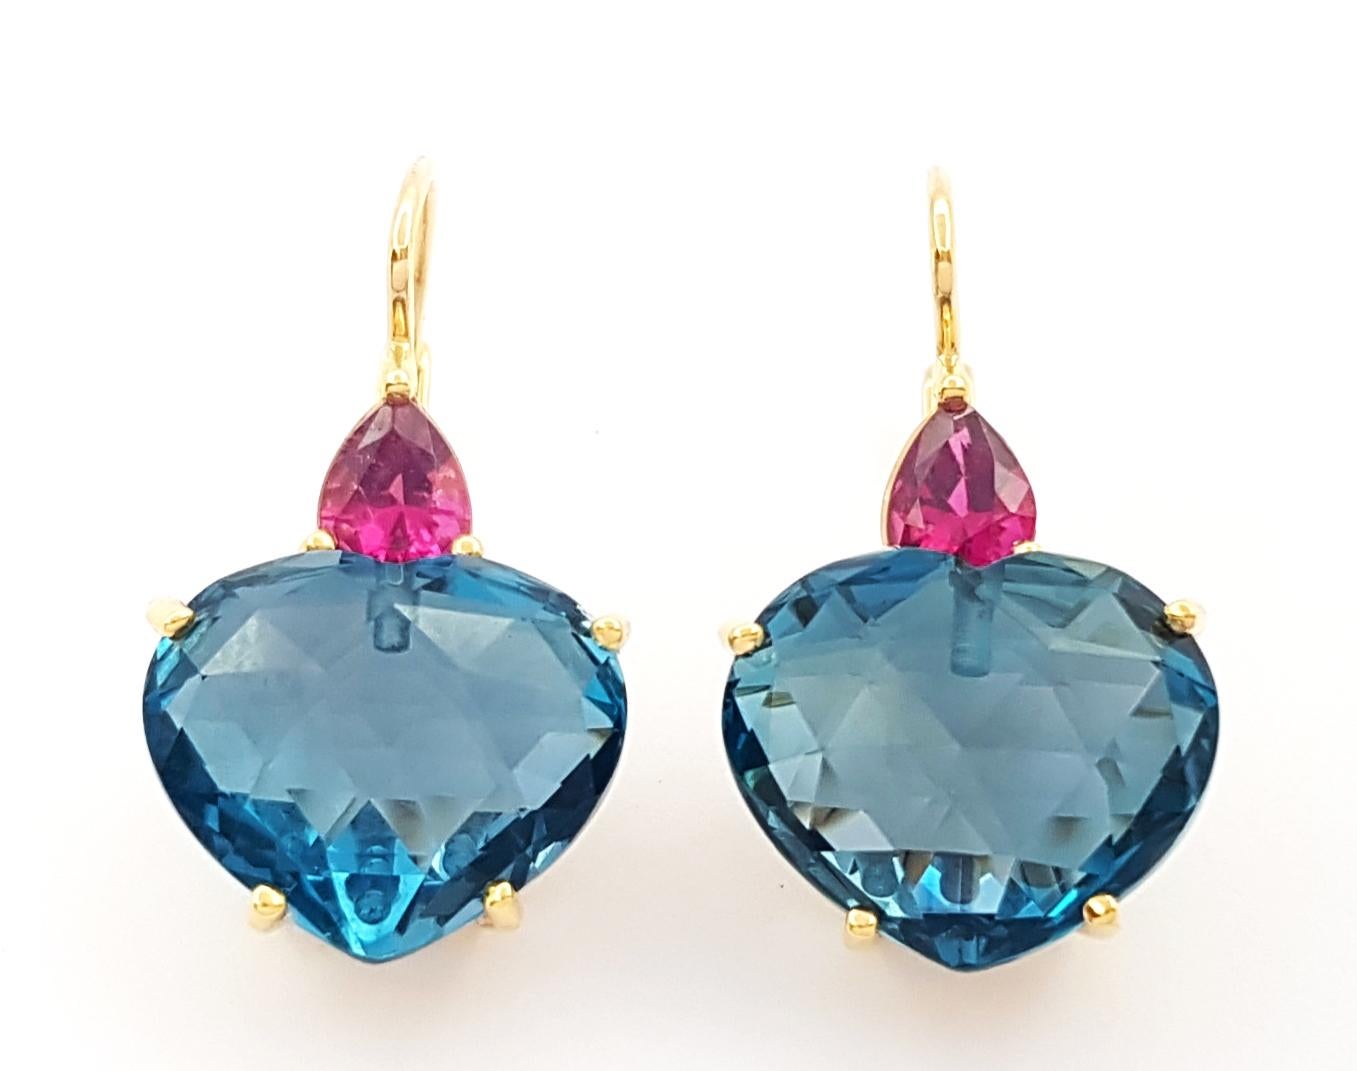 Blue Topaz 23.04 carats with Rubelite 1.07 carats Earrings set in 18K Gold Settings

Width: 1.6 cm 
Length: 2.7 cm
Total Weight: 10.70 grams

